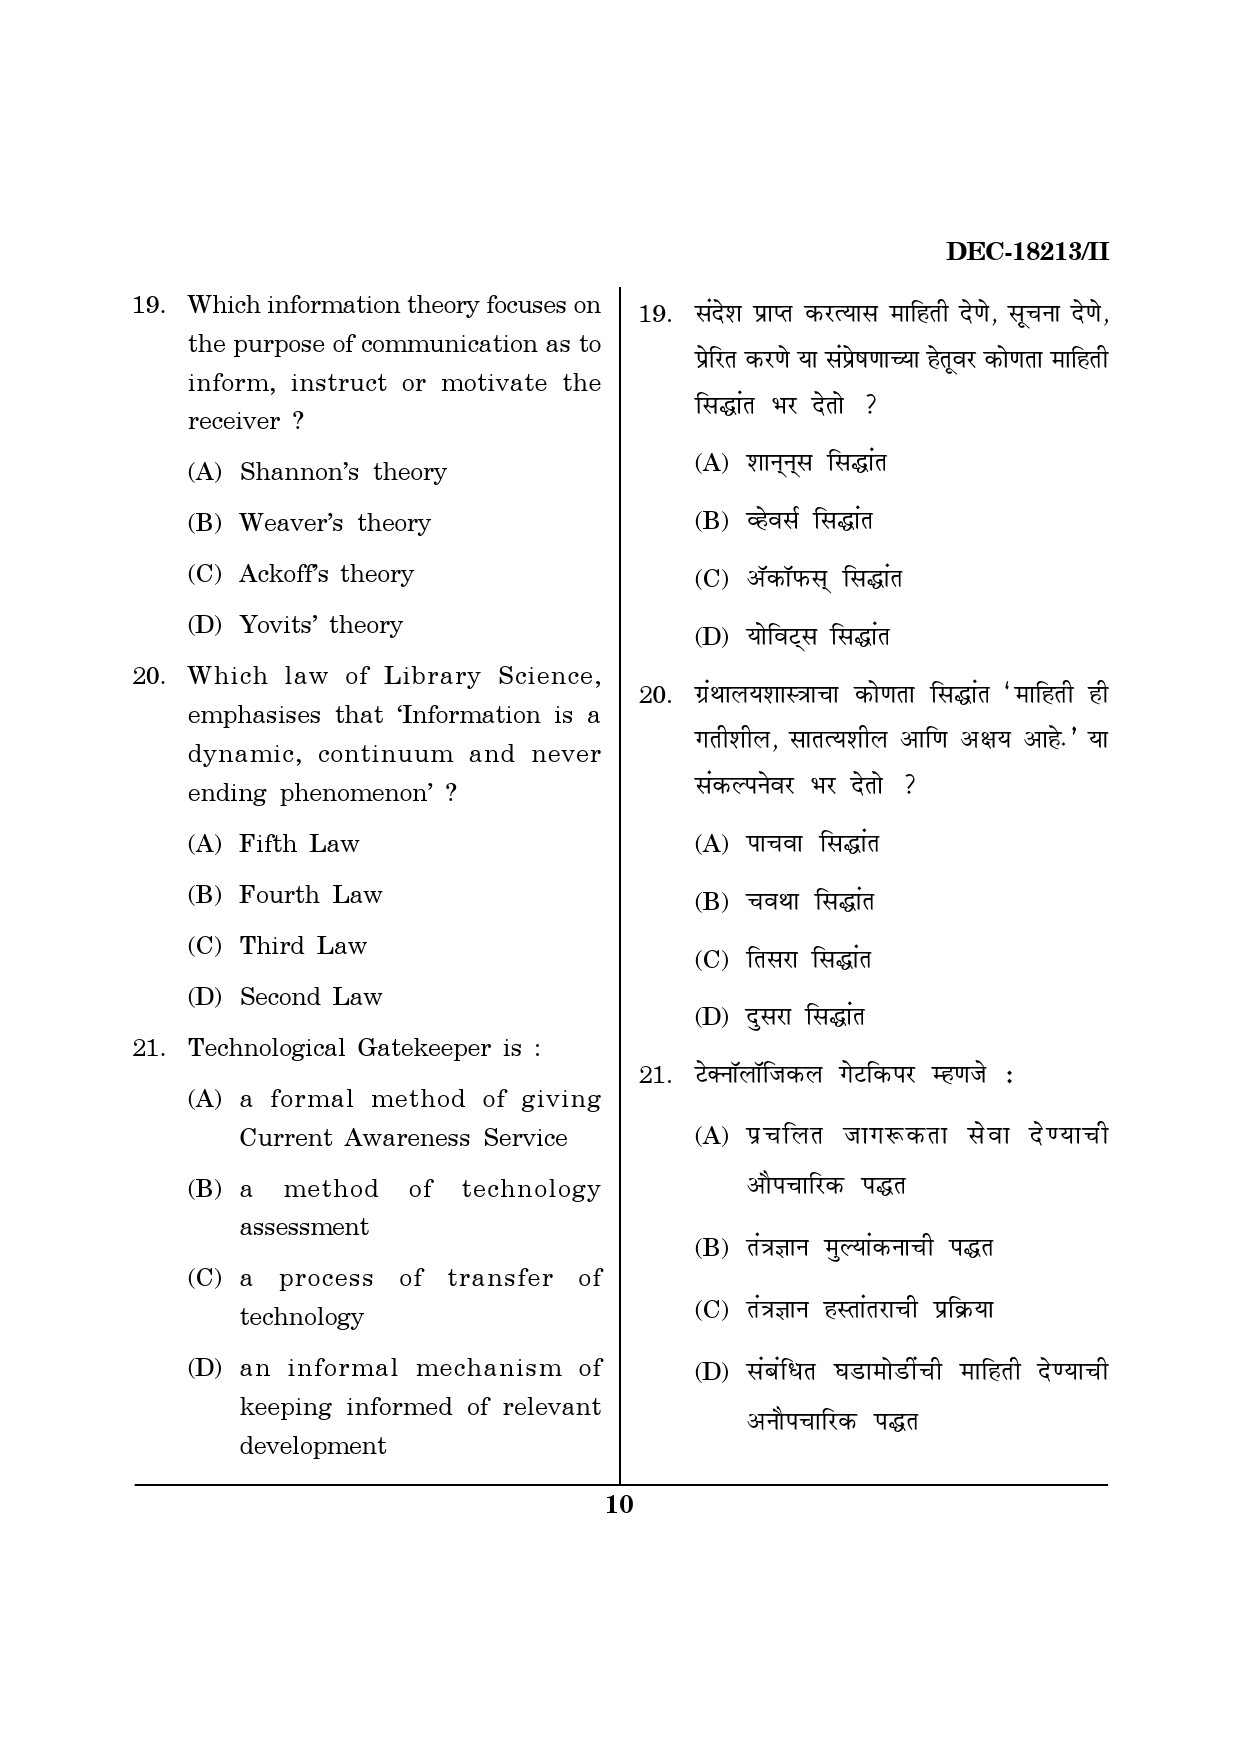 Maharashtra SET Library Information Science Question Paper II December 2013 9